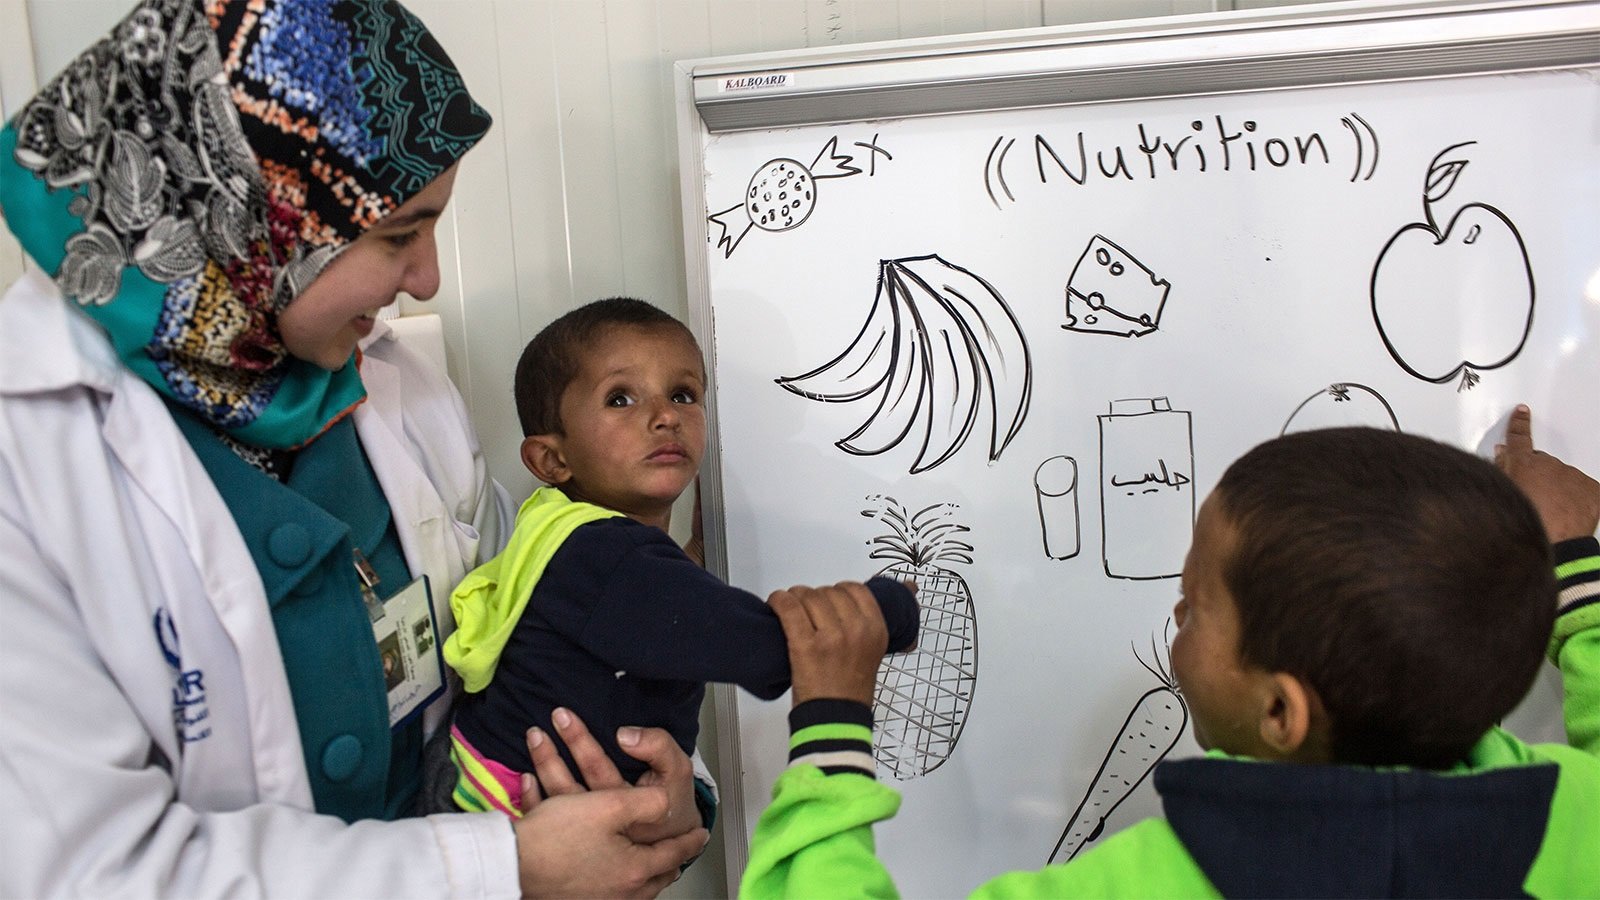 Photo of a healthcare worker caring for two young boys in a Syria refugee camp.